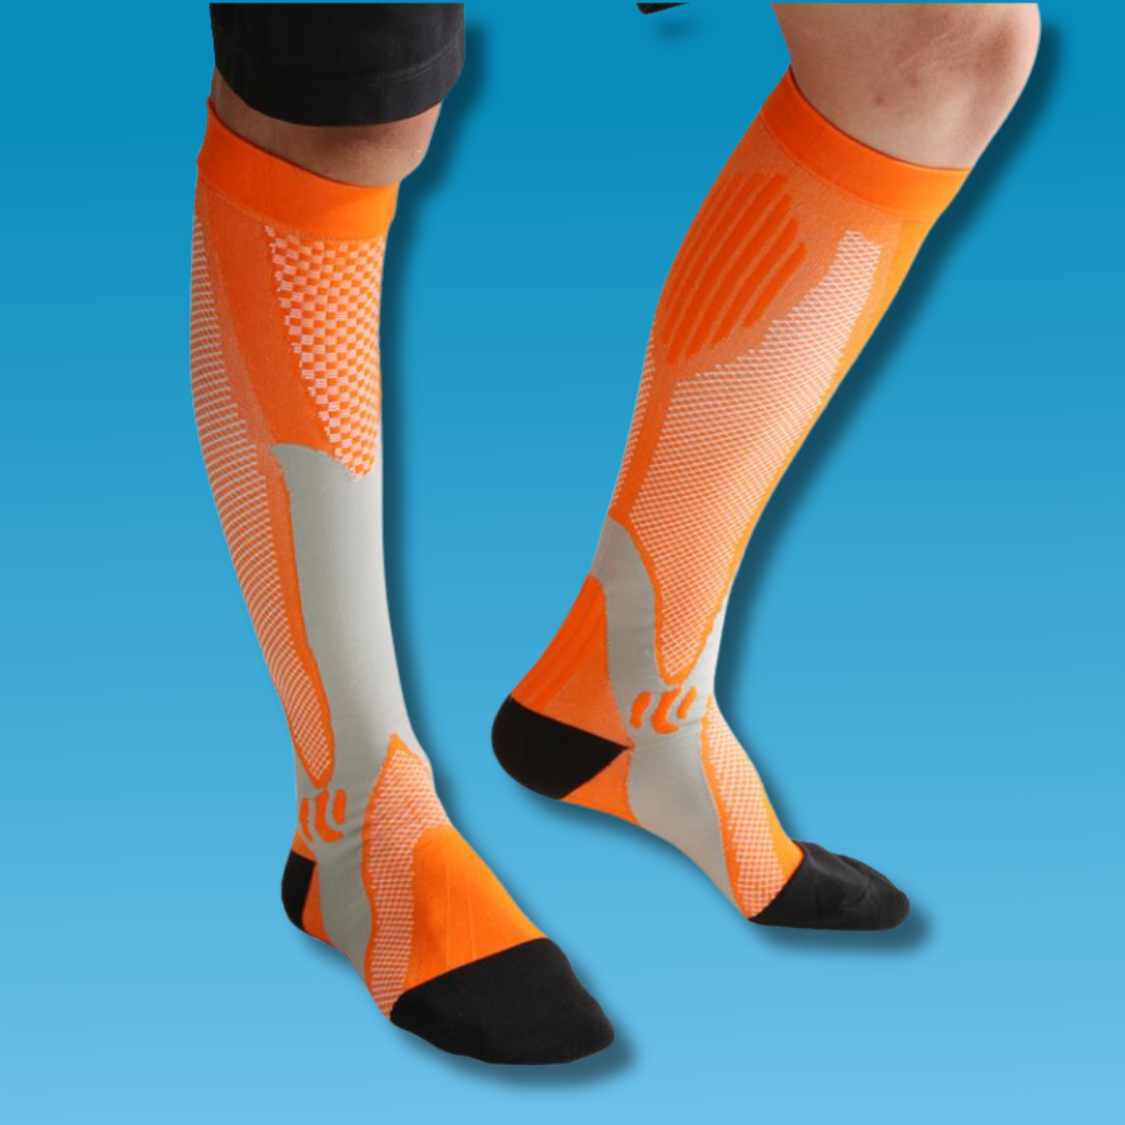 RevitaLife Advanced Compression Socks | Foot and Leg Pain Relief